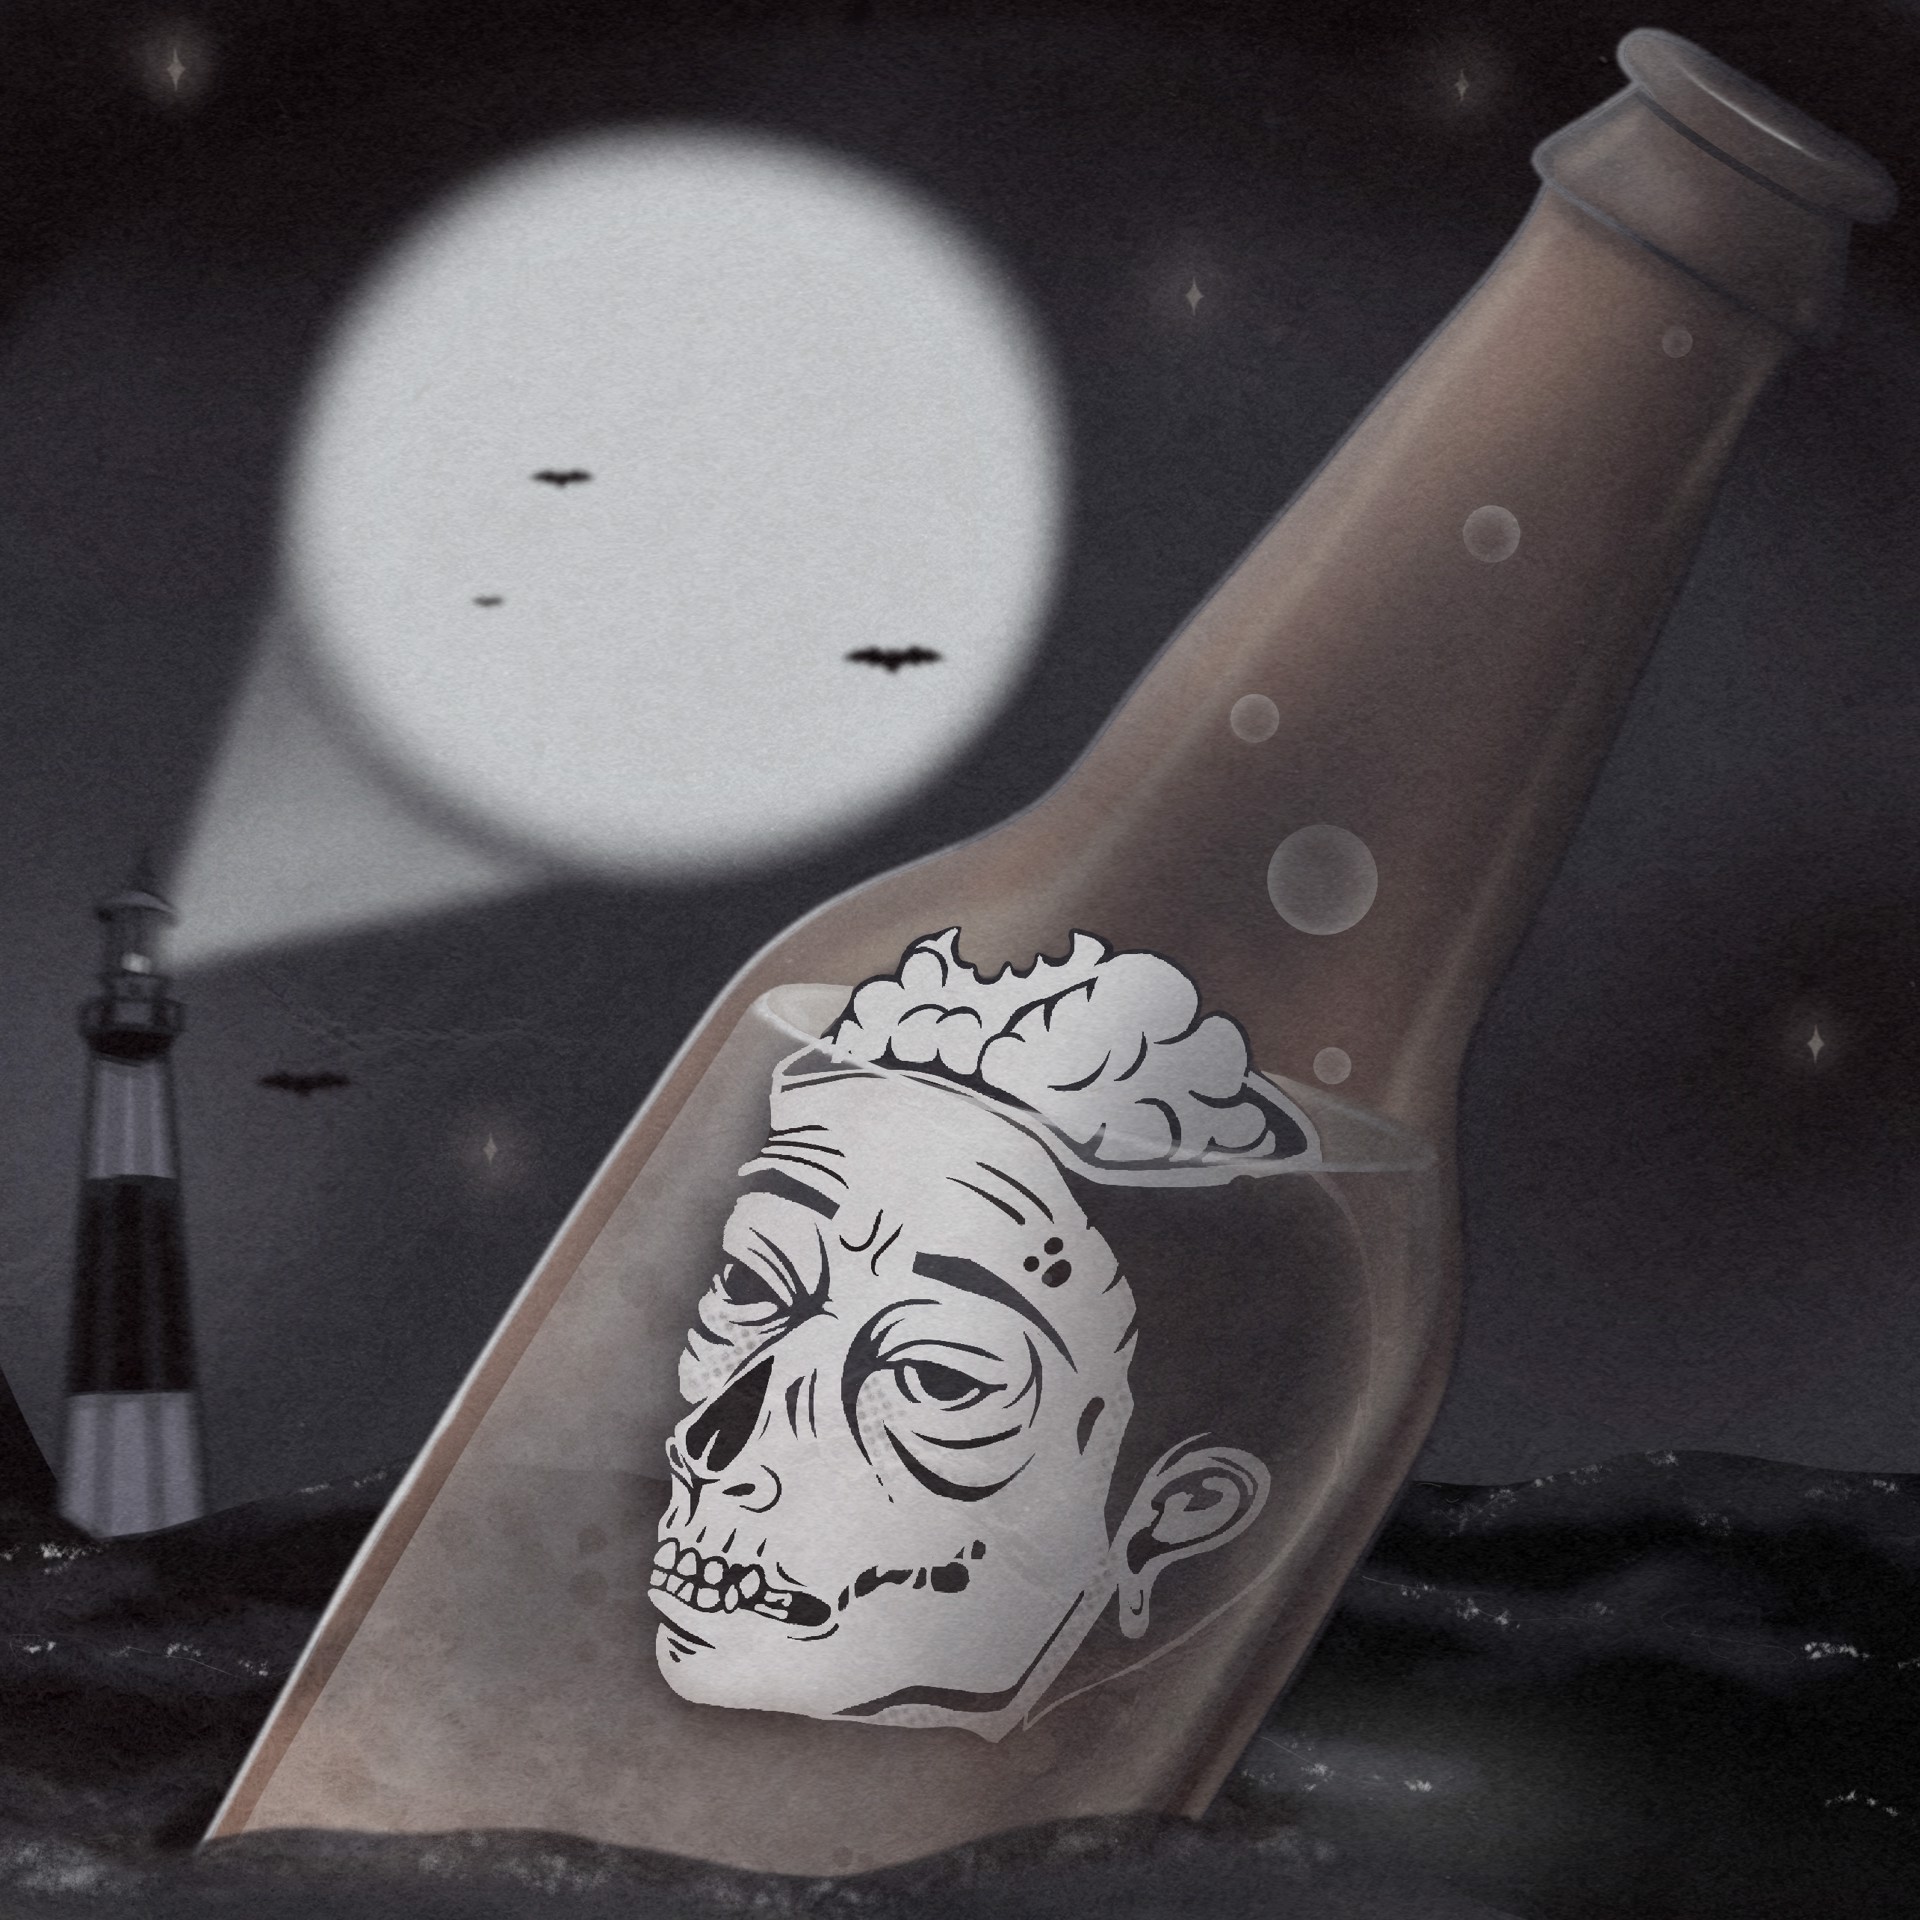 Lost In The Bottle, by Brooke Riggs by Visiting Artists